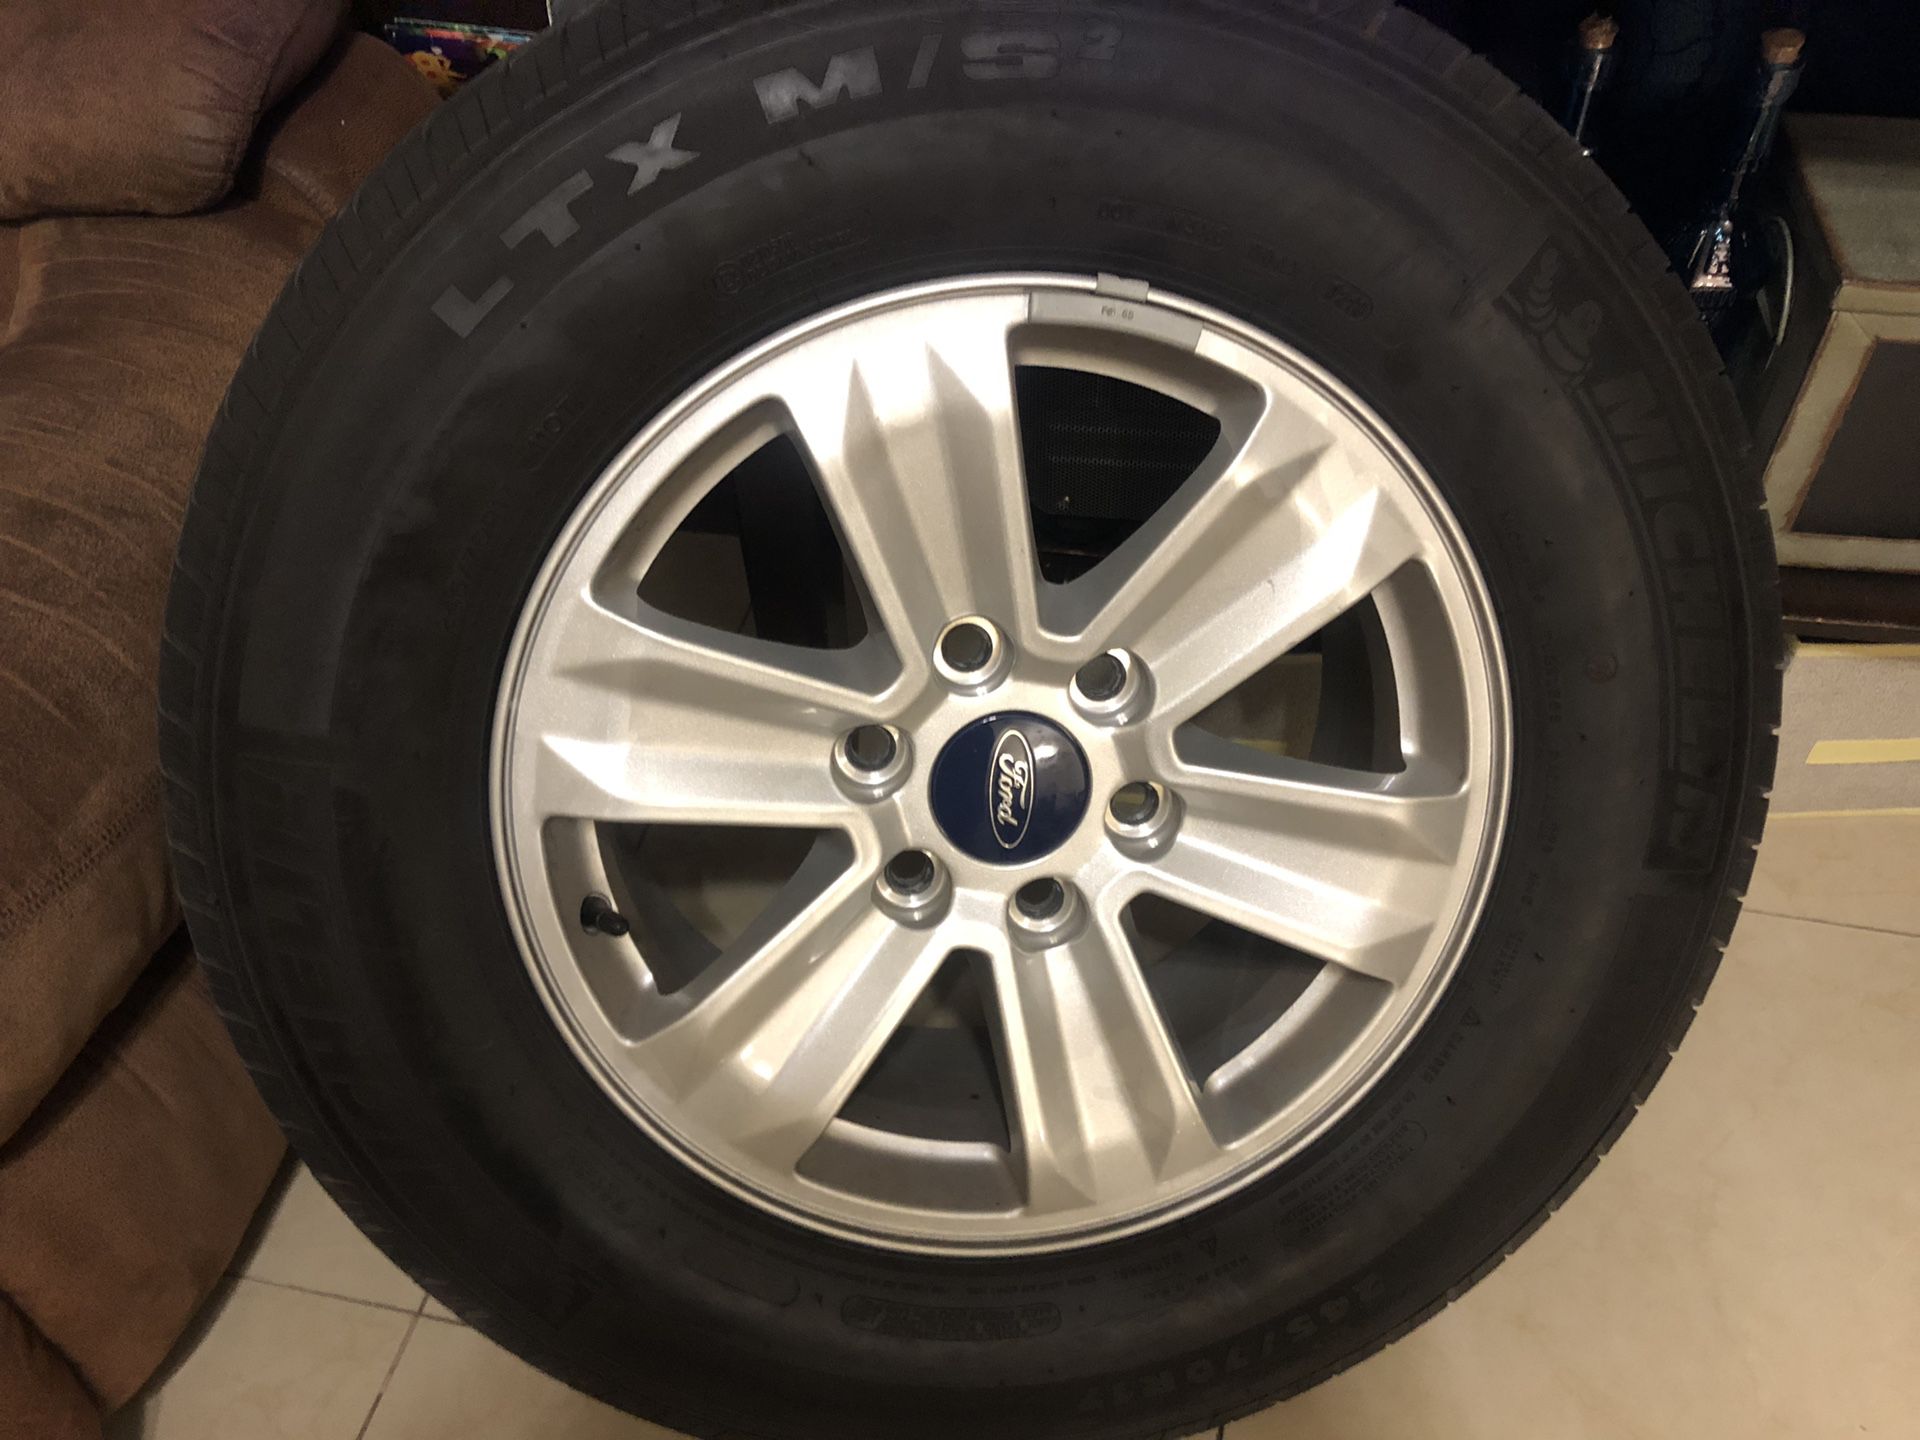 4 wheels and tires Ford F150, use 30.000 milles in great condition 245 70 R17 -Neumáticos con Rines original de Ford F150 Marca Michelin solo uso 30